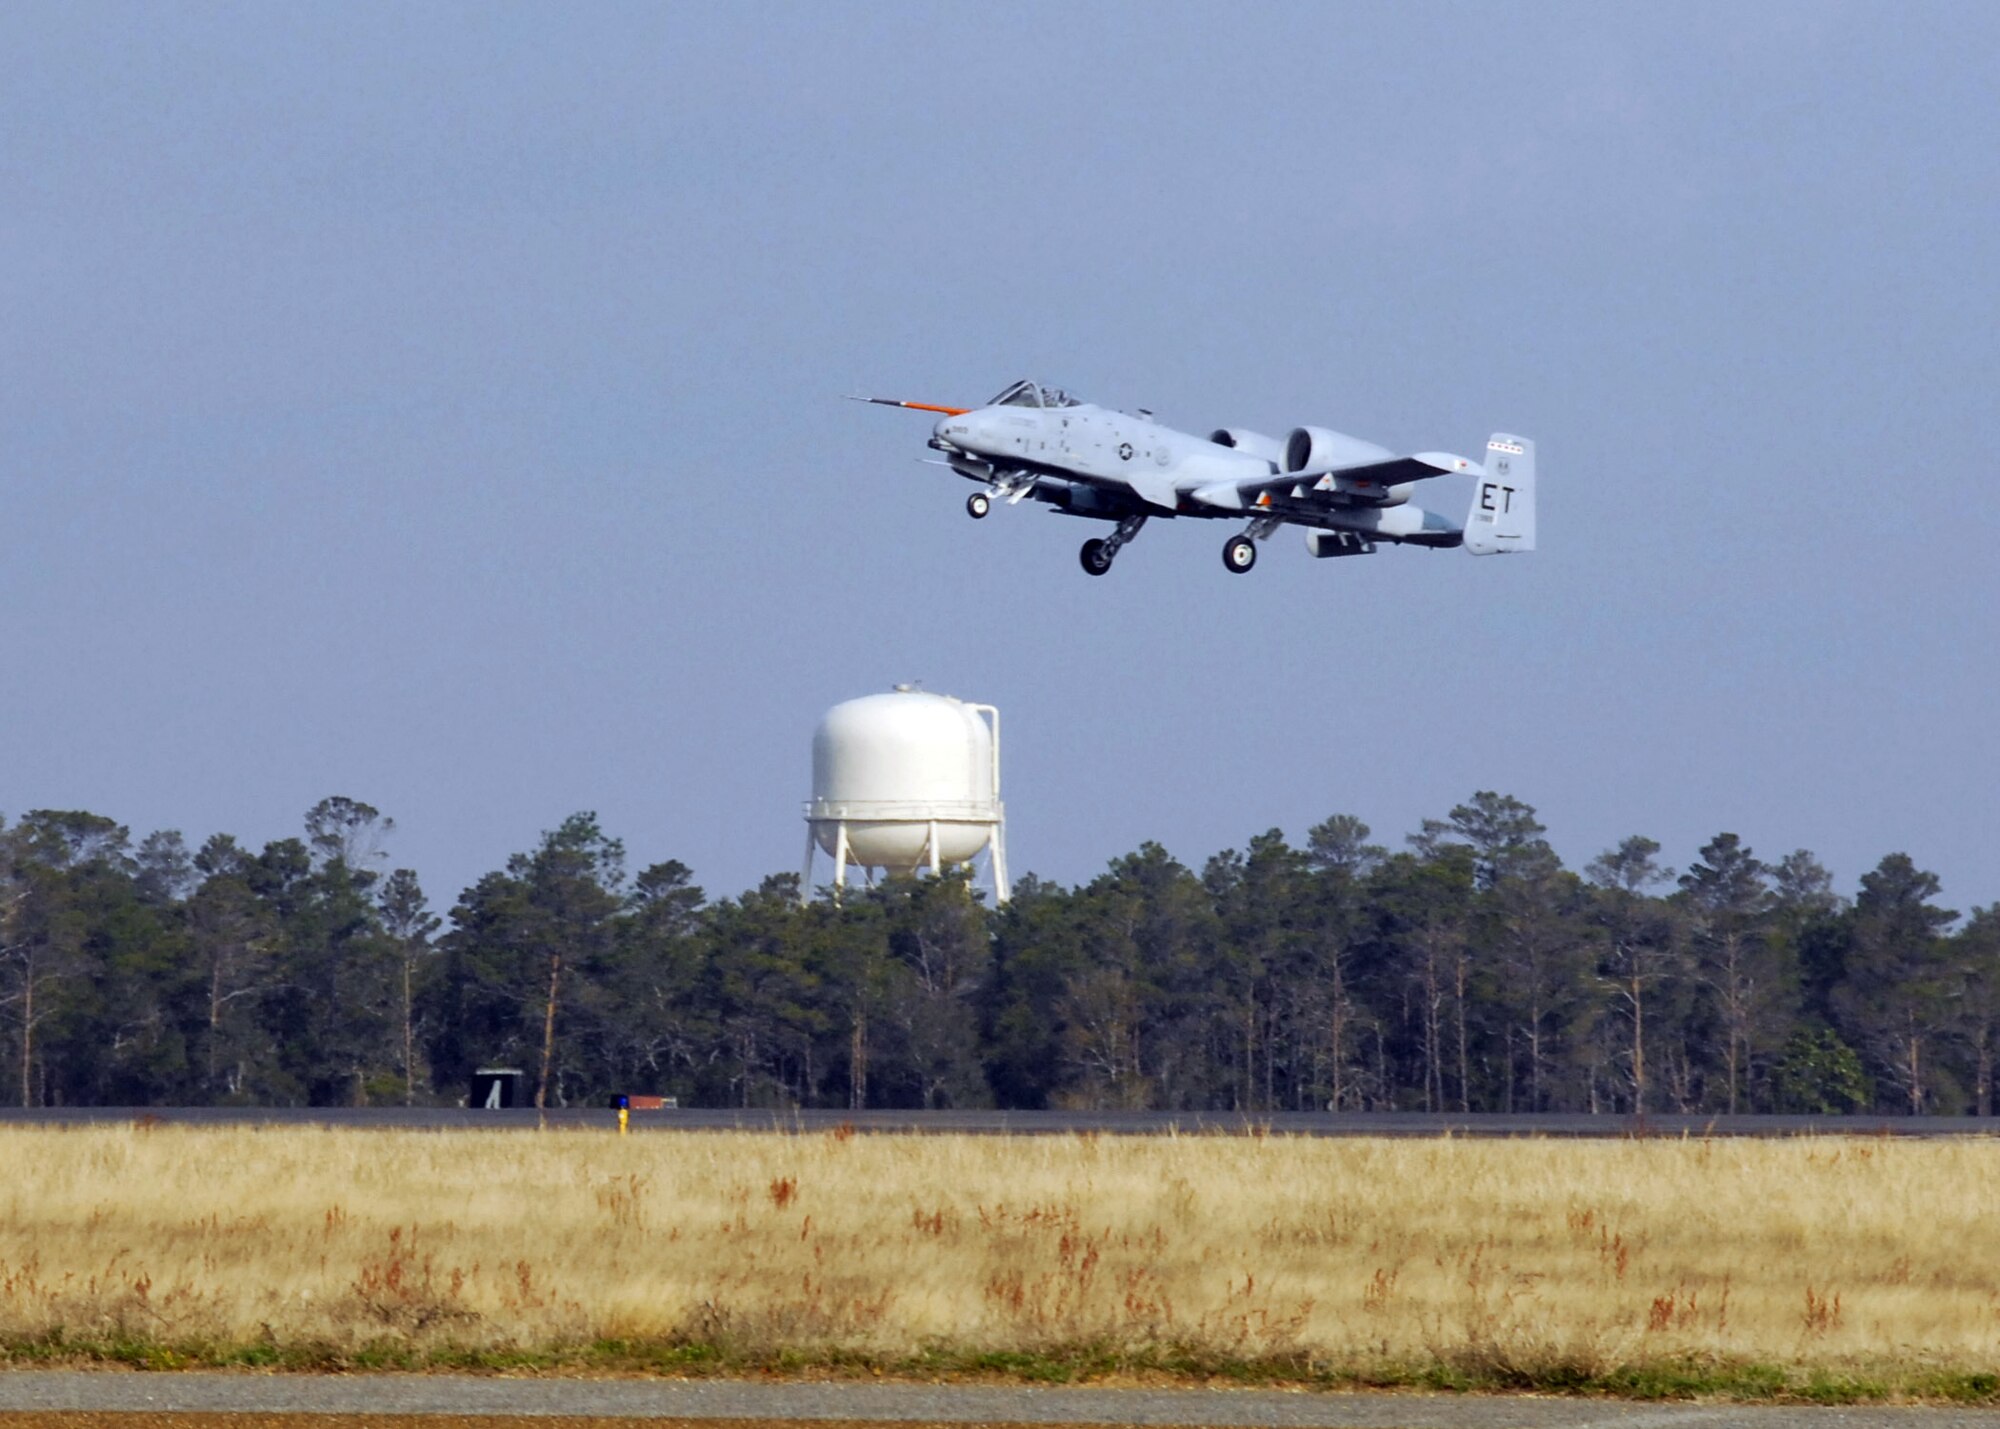 An A-10C Thunderbolt II takes off from Eglin Air Force Base, Fla., March 25, 2010, marking the first flight of an aircraft powered solely by a biomass-derived jet fuel blend. The A-10 was fueled with a 50/50 blend of Hydrotreated Renewable Jet and JP-8.  (U.S. Air Force photo/Samuel King Jr.)